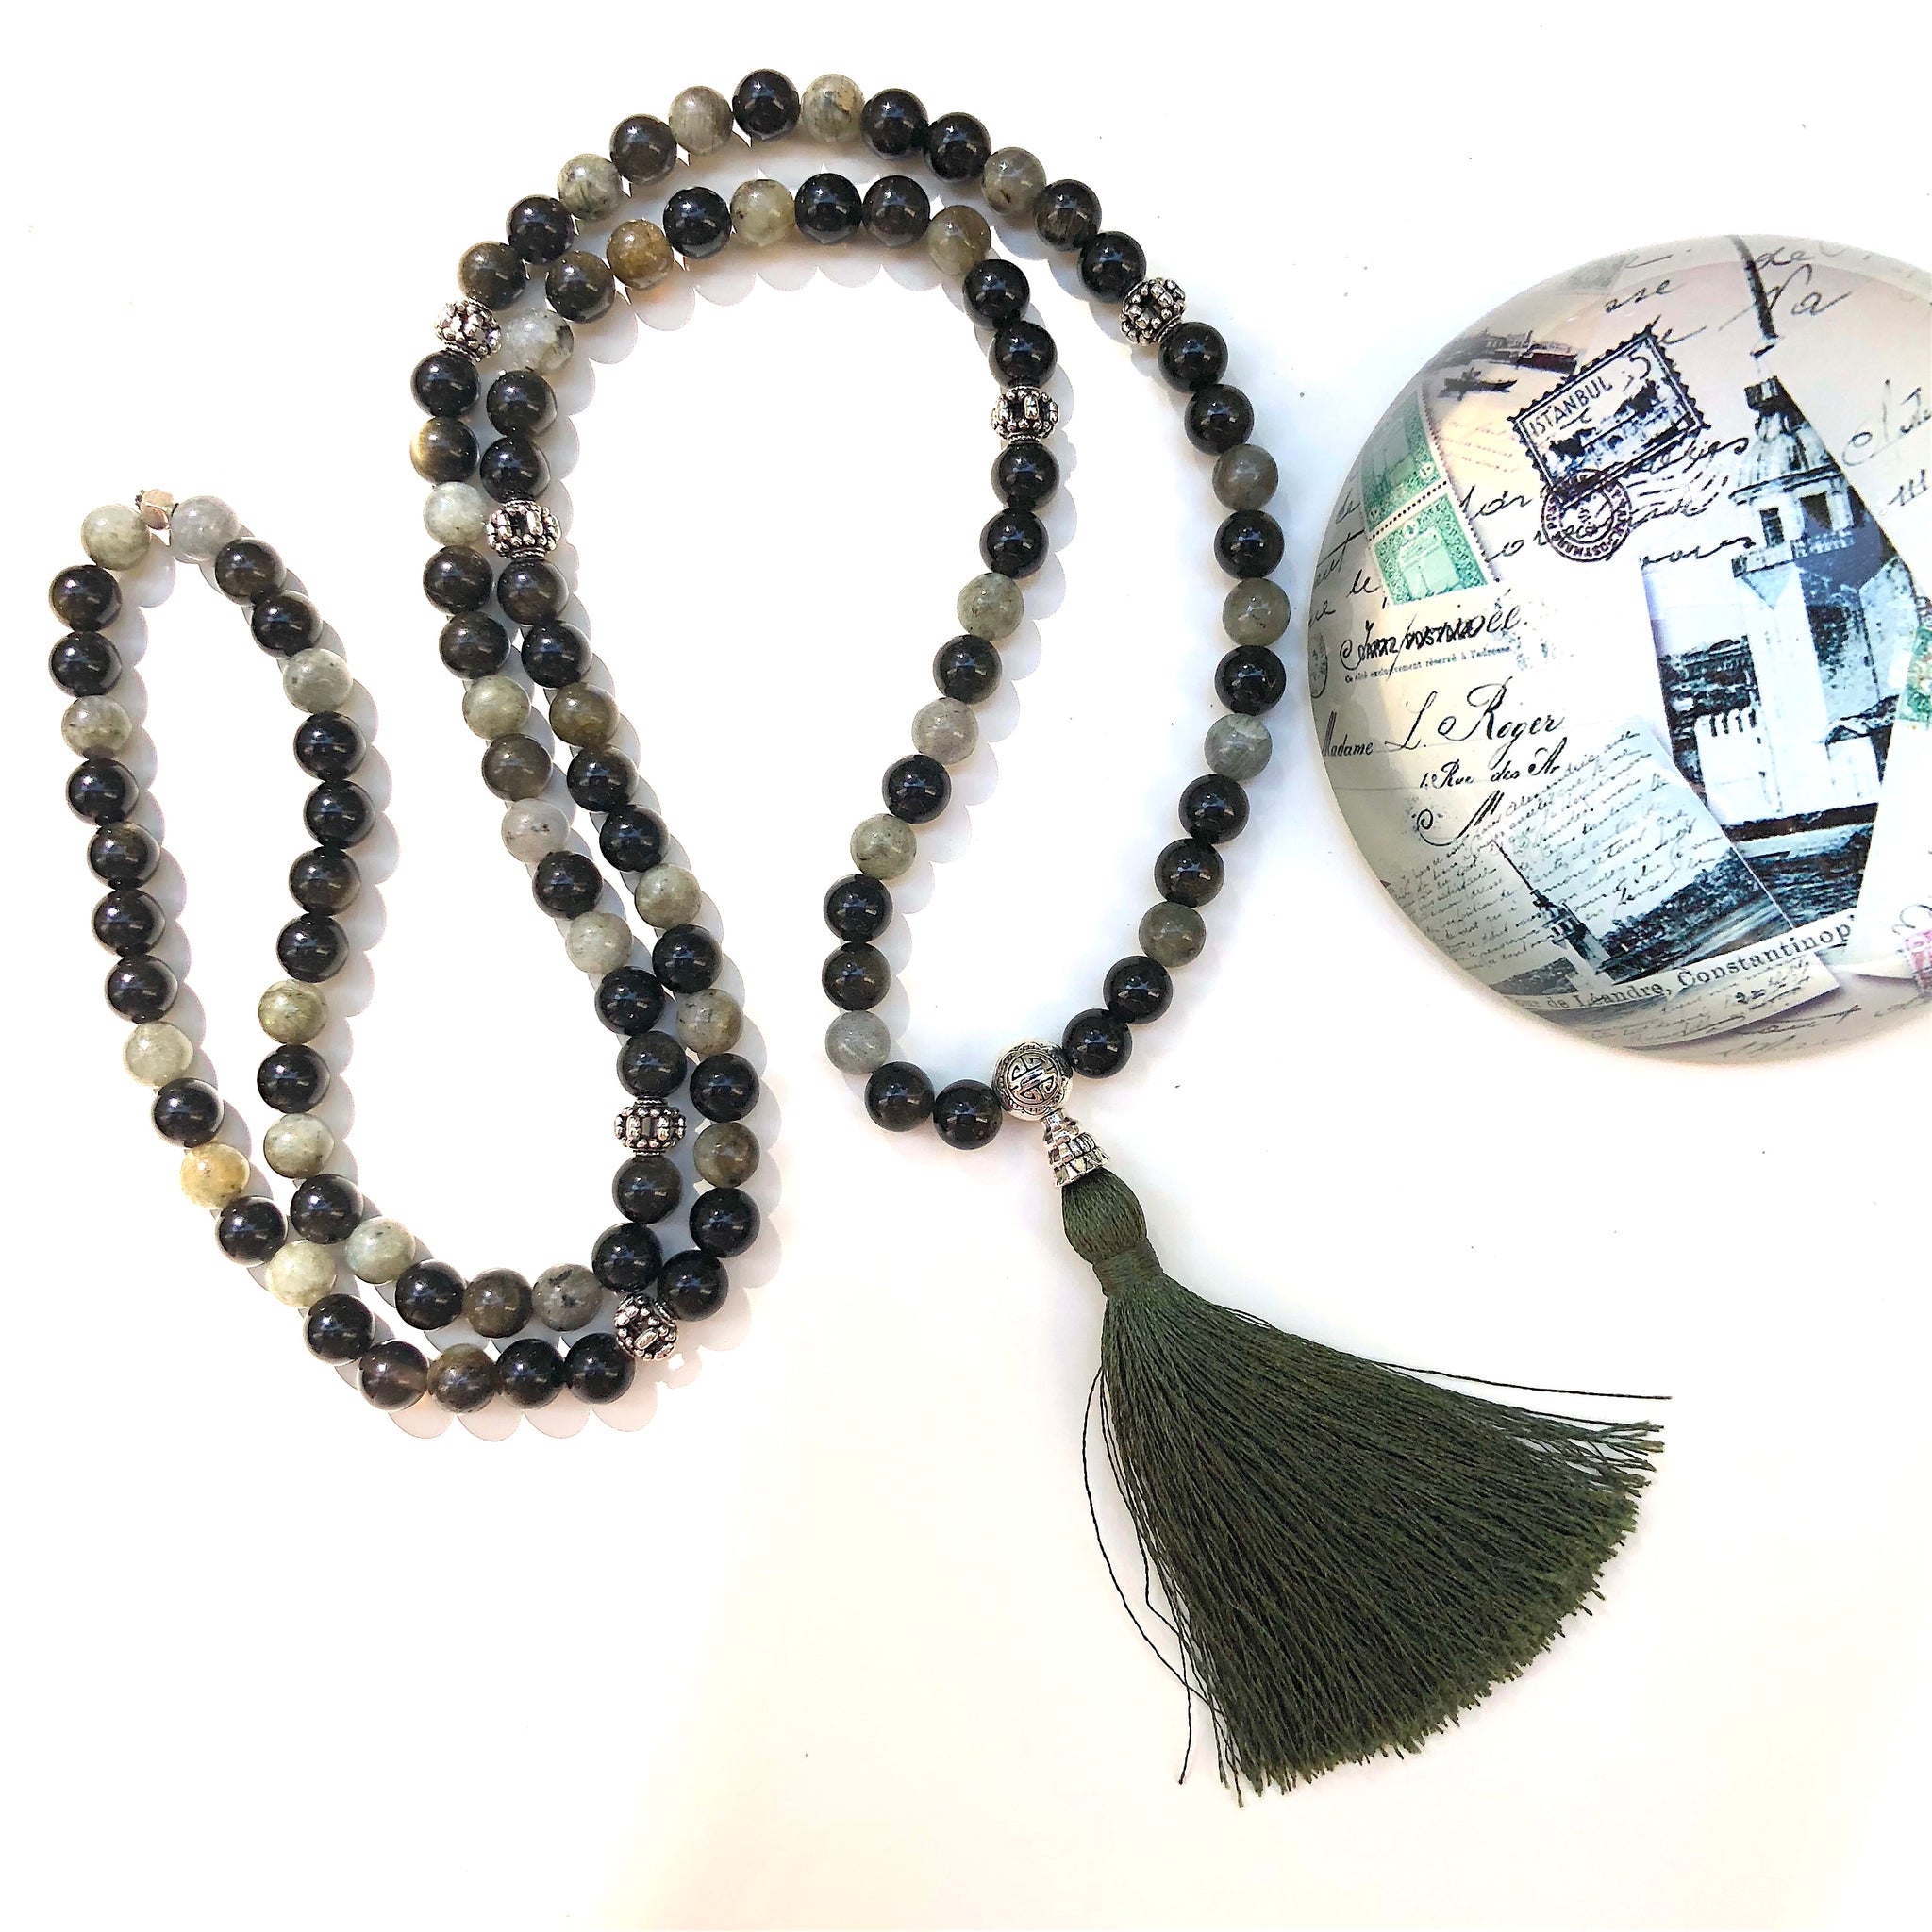 Aria Mala Atelier's unique one-of-a-kind Protective Labradorit and Obsidian gemstone meditation japa mala with silver charm is for yoga meditation empowering spiritual daily practise and intention setting